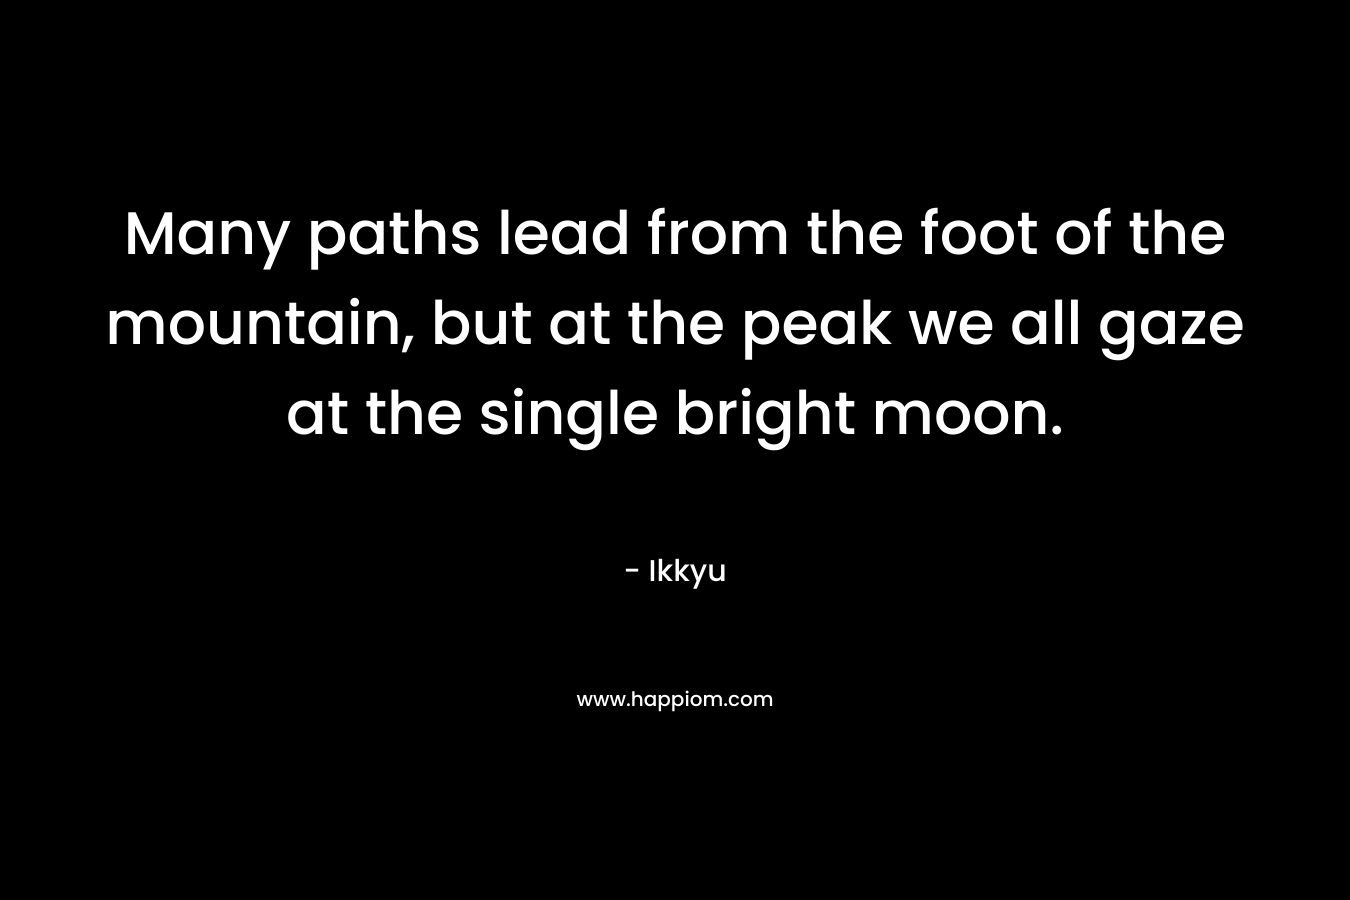 Many paths lead from the foot of the mountain, but at the peak we all gaze at the single bright moon.